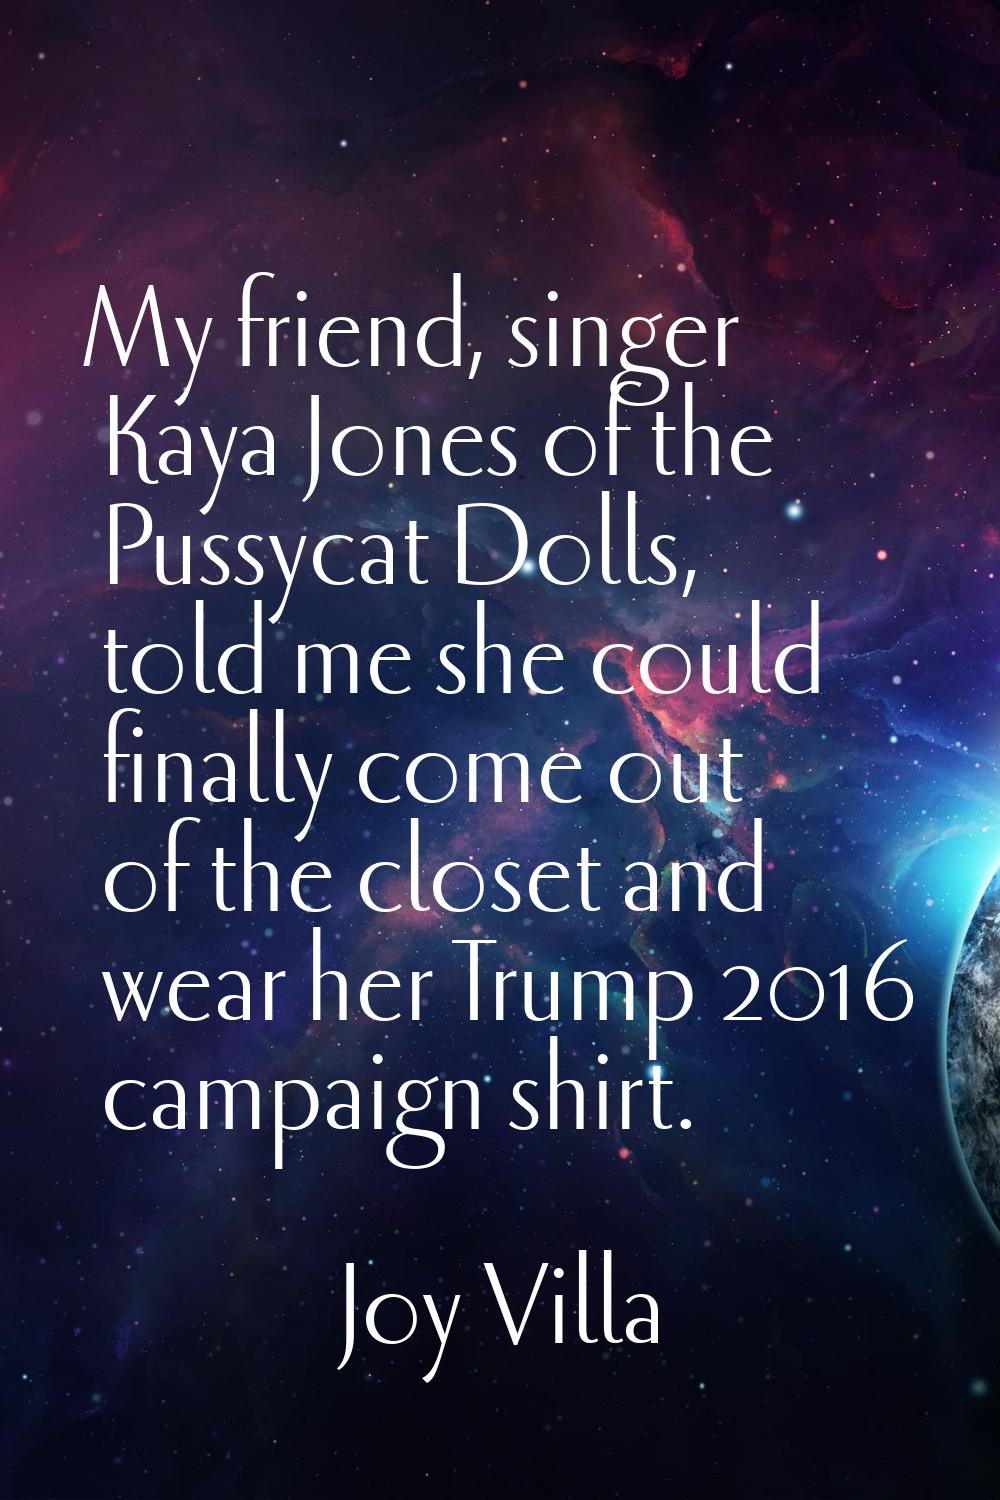 My friend, singer Kaya Jones of the Pussycat Dolls, told me she could finally come out of the close